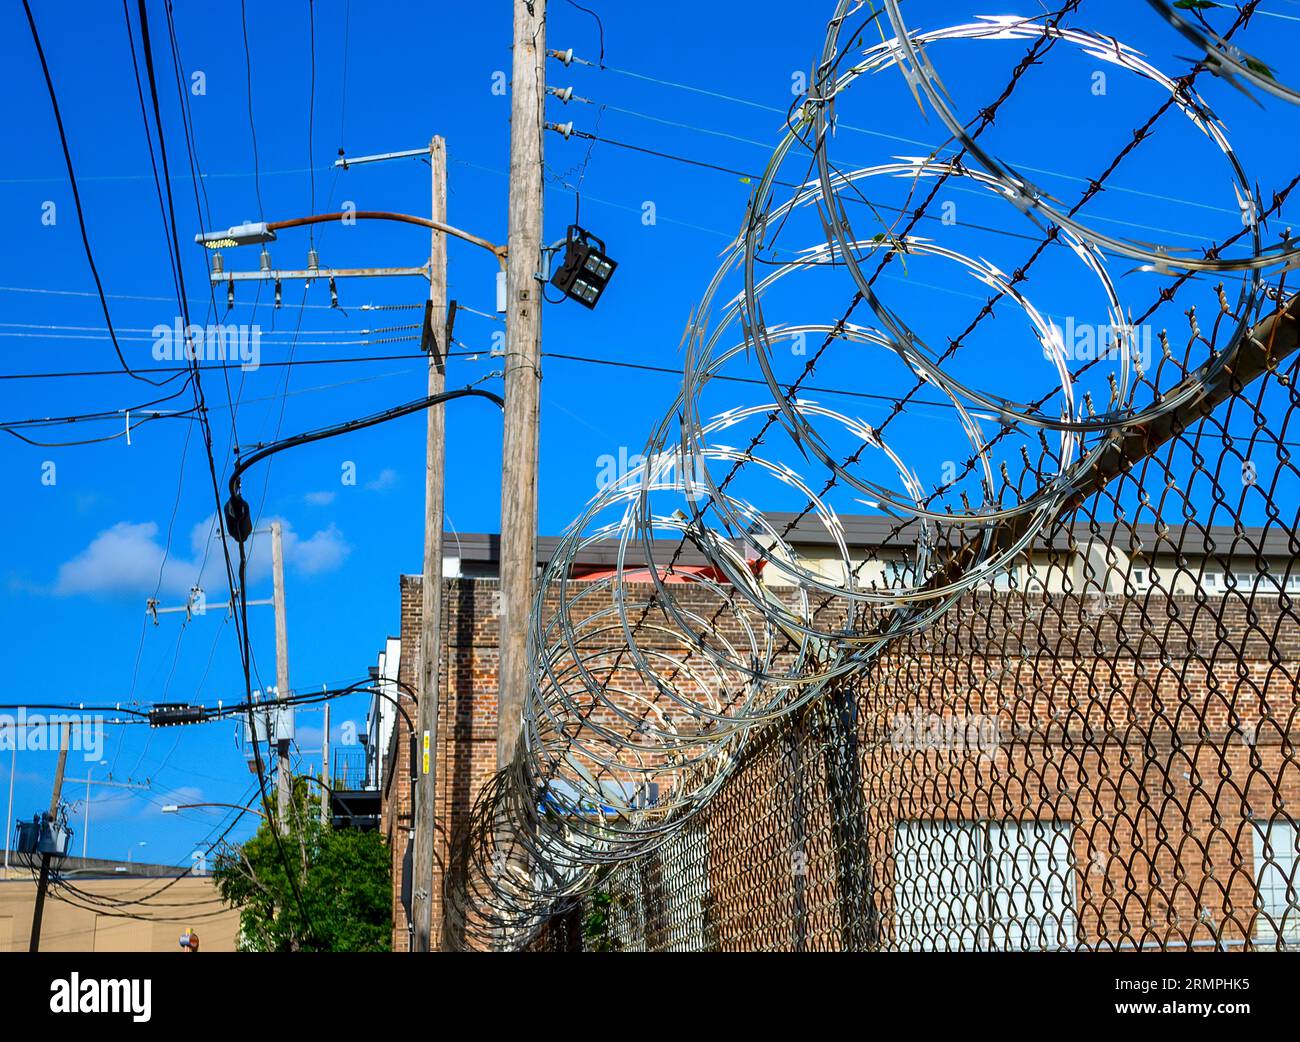 NEW ORLEANS, LA, USA - AUGUST 22, 2023: Razor concertina wire on a fence protecting a business in an urban setting Stock Photo